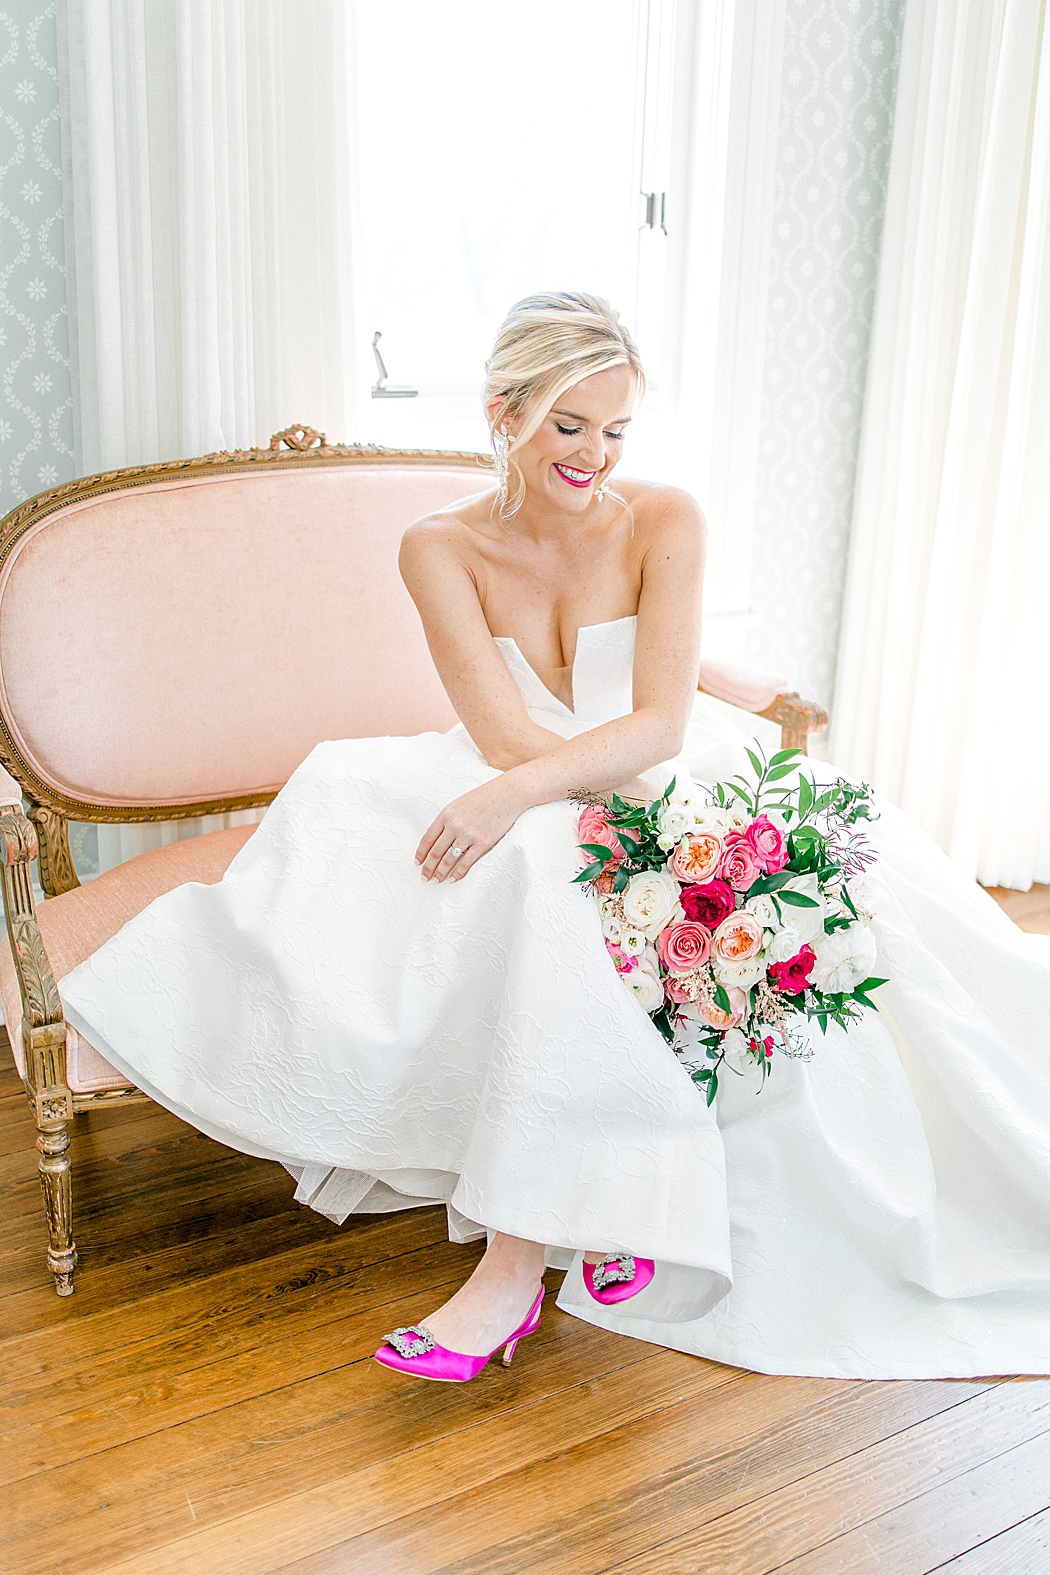 Woodbine Mansion wedding bridal photos by Allison Jeffers Photography in Round Rock Texas 0011